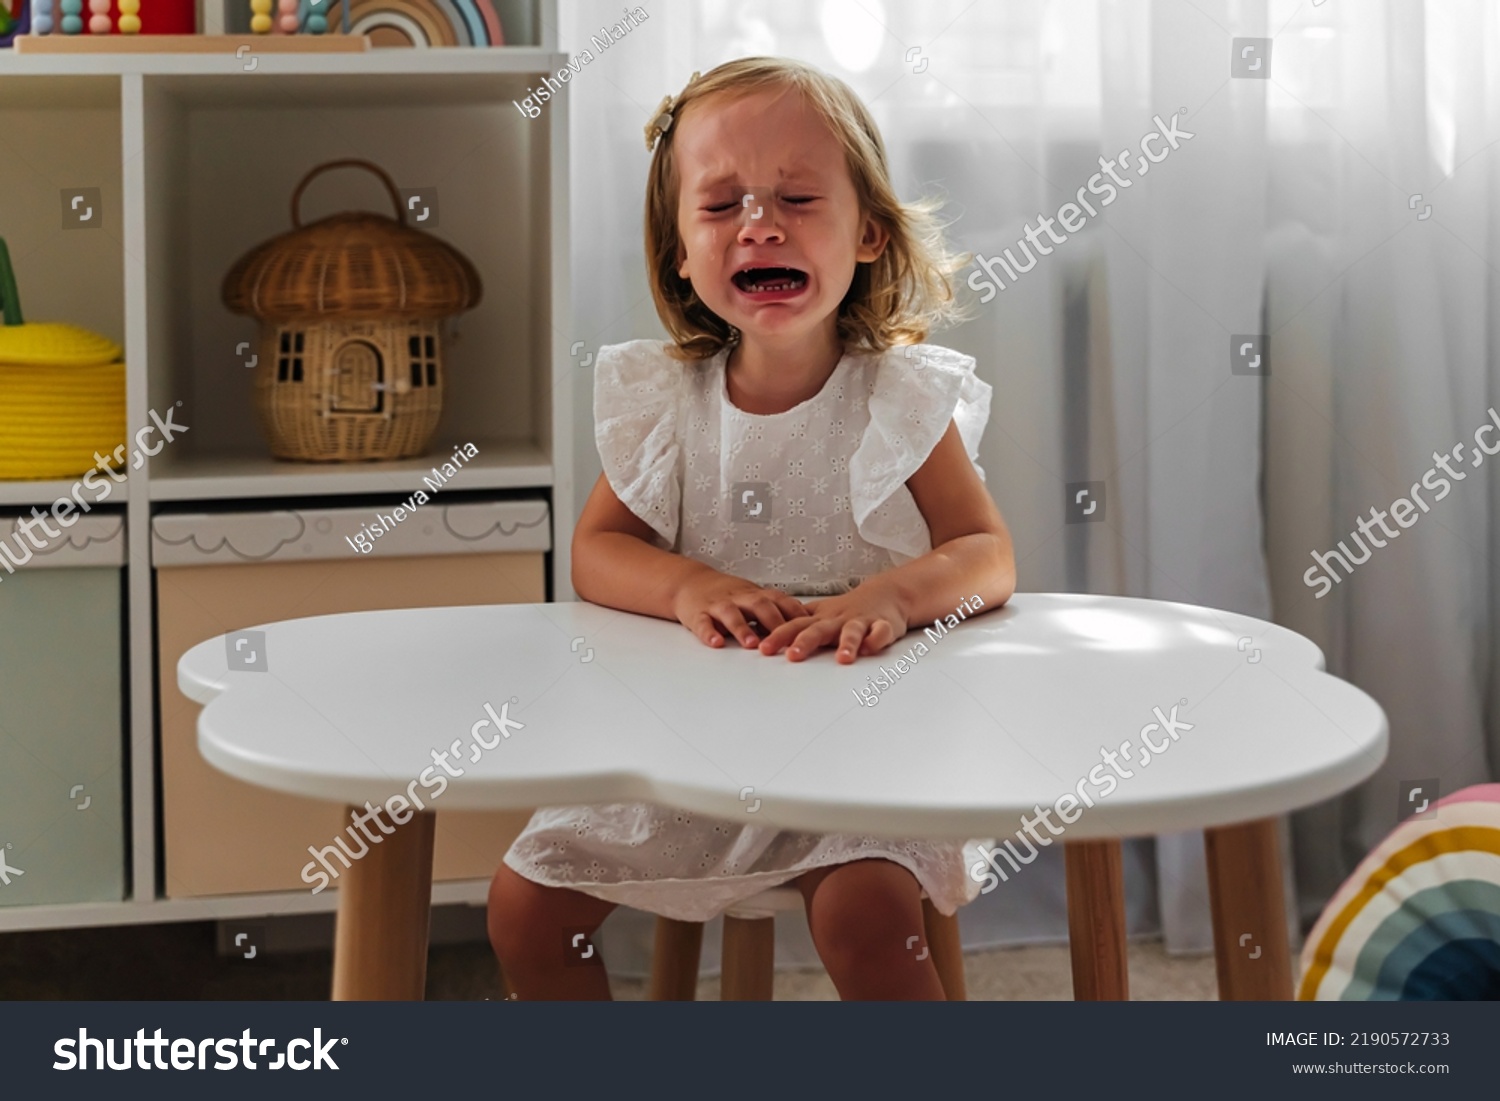 little girl cries at kitchen table saying i didn't